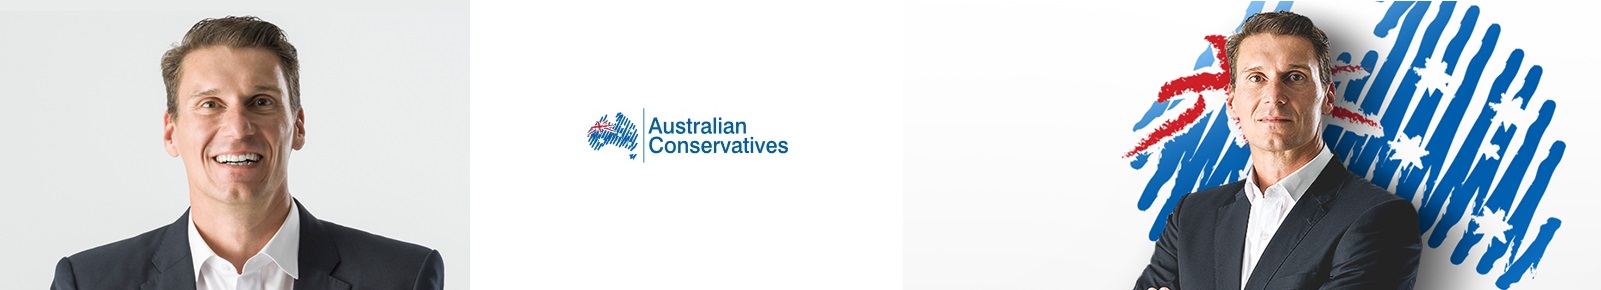 Australian Conservatives - Energy Policy